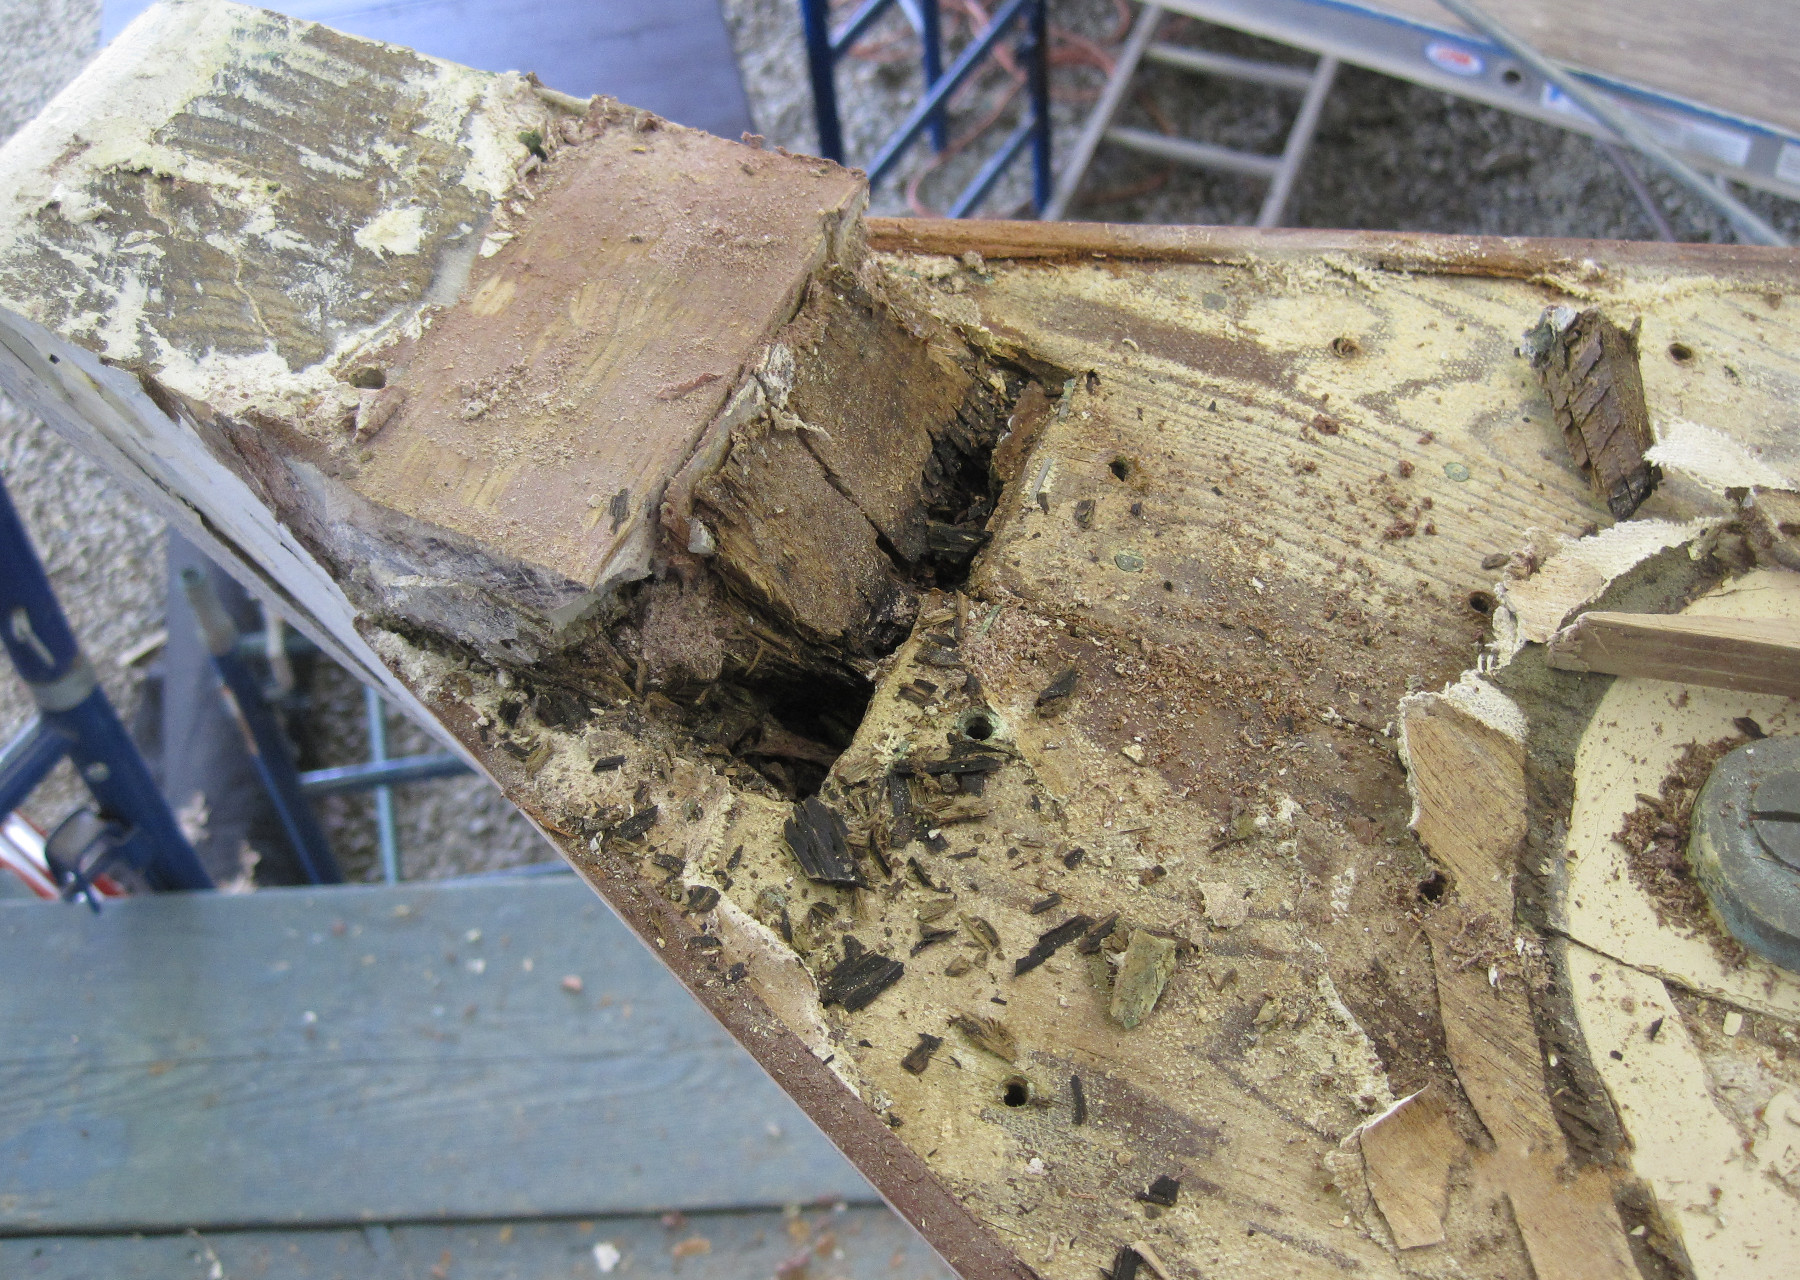 Wooden Boat Restoration - Kestrel - Like other wood on the boat, the stem had fallen into disrepair.